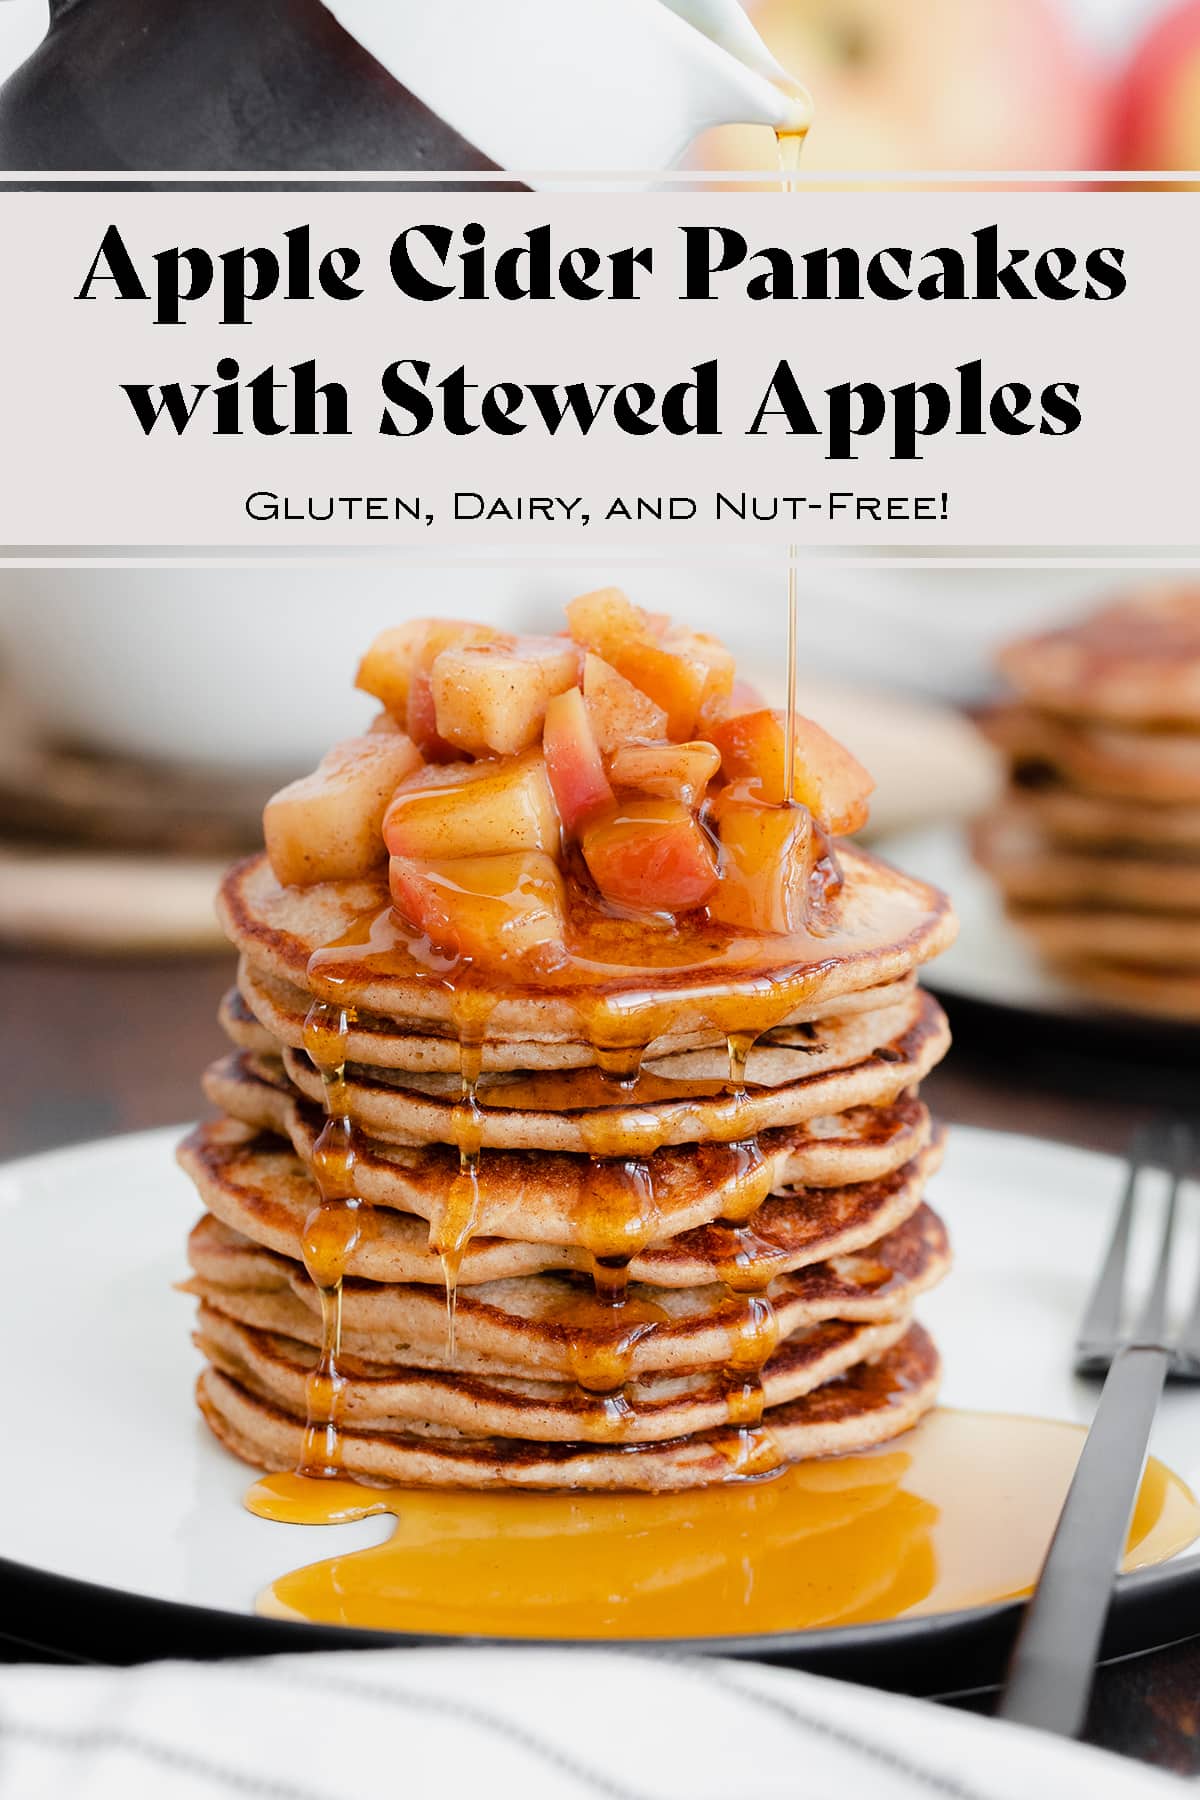 Chocolate Chip Apple Cider Pancakes with Stewed Apples